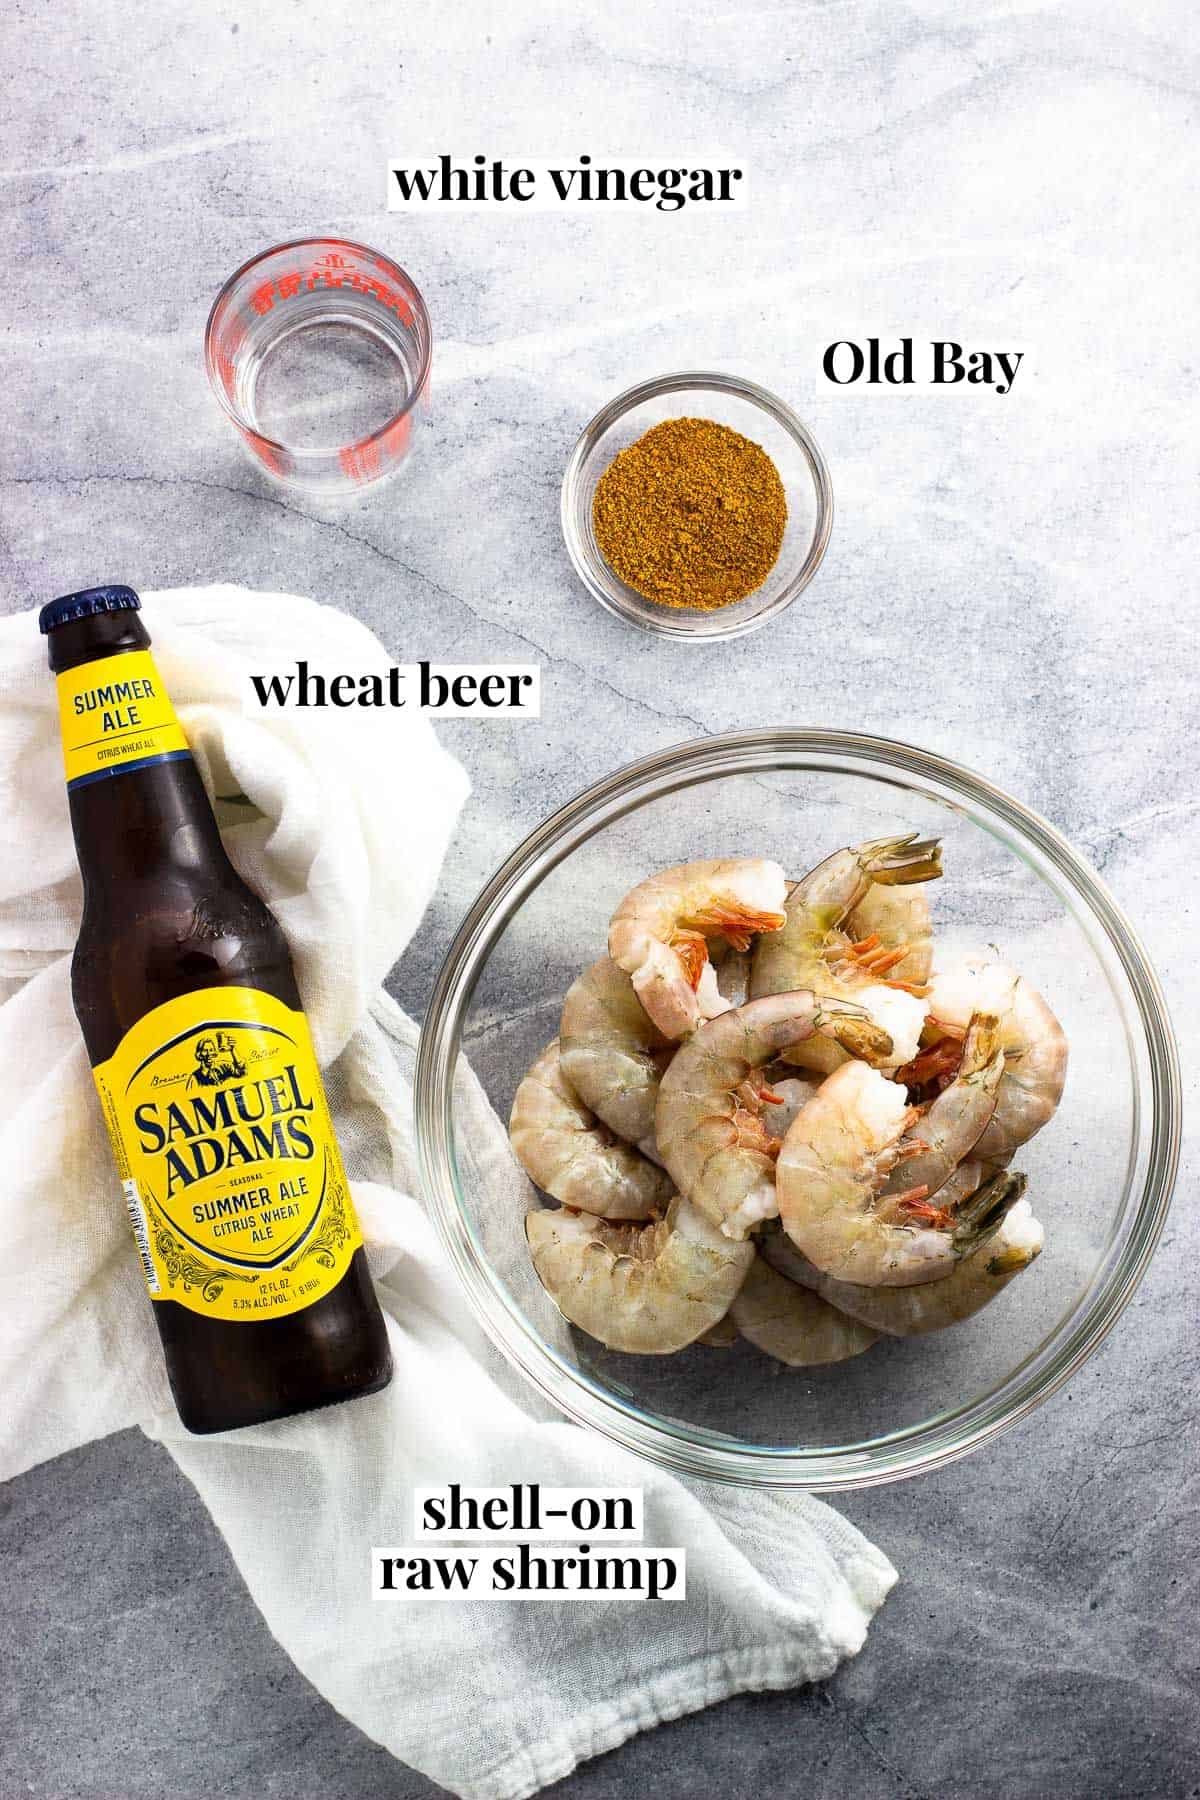 Ingredients labeled with their names: white vinegar, Old Bay, wheat beer, and shell-on raw shrimp.